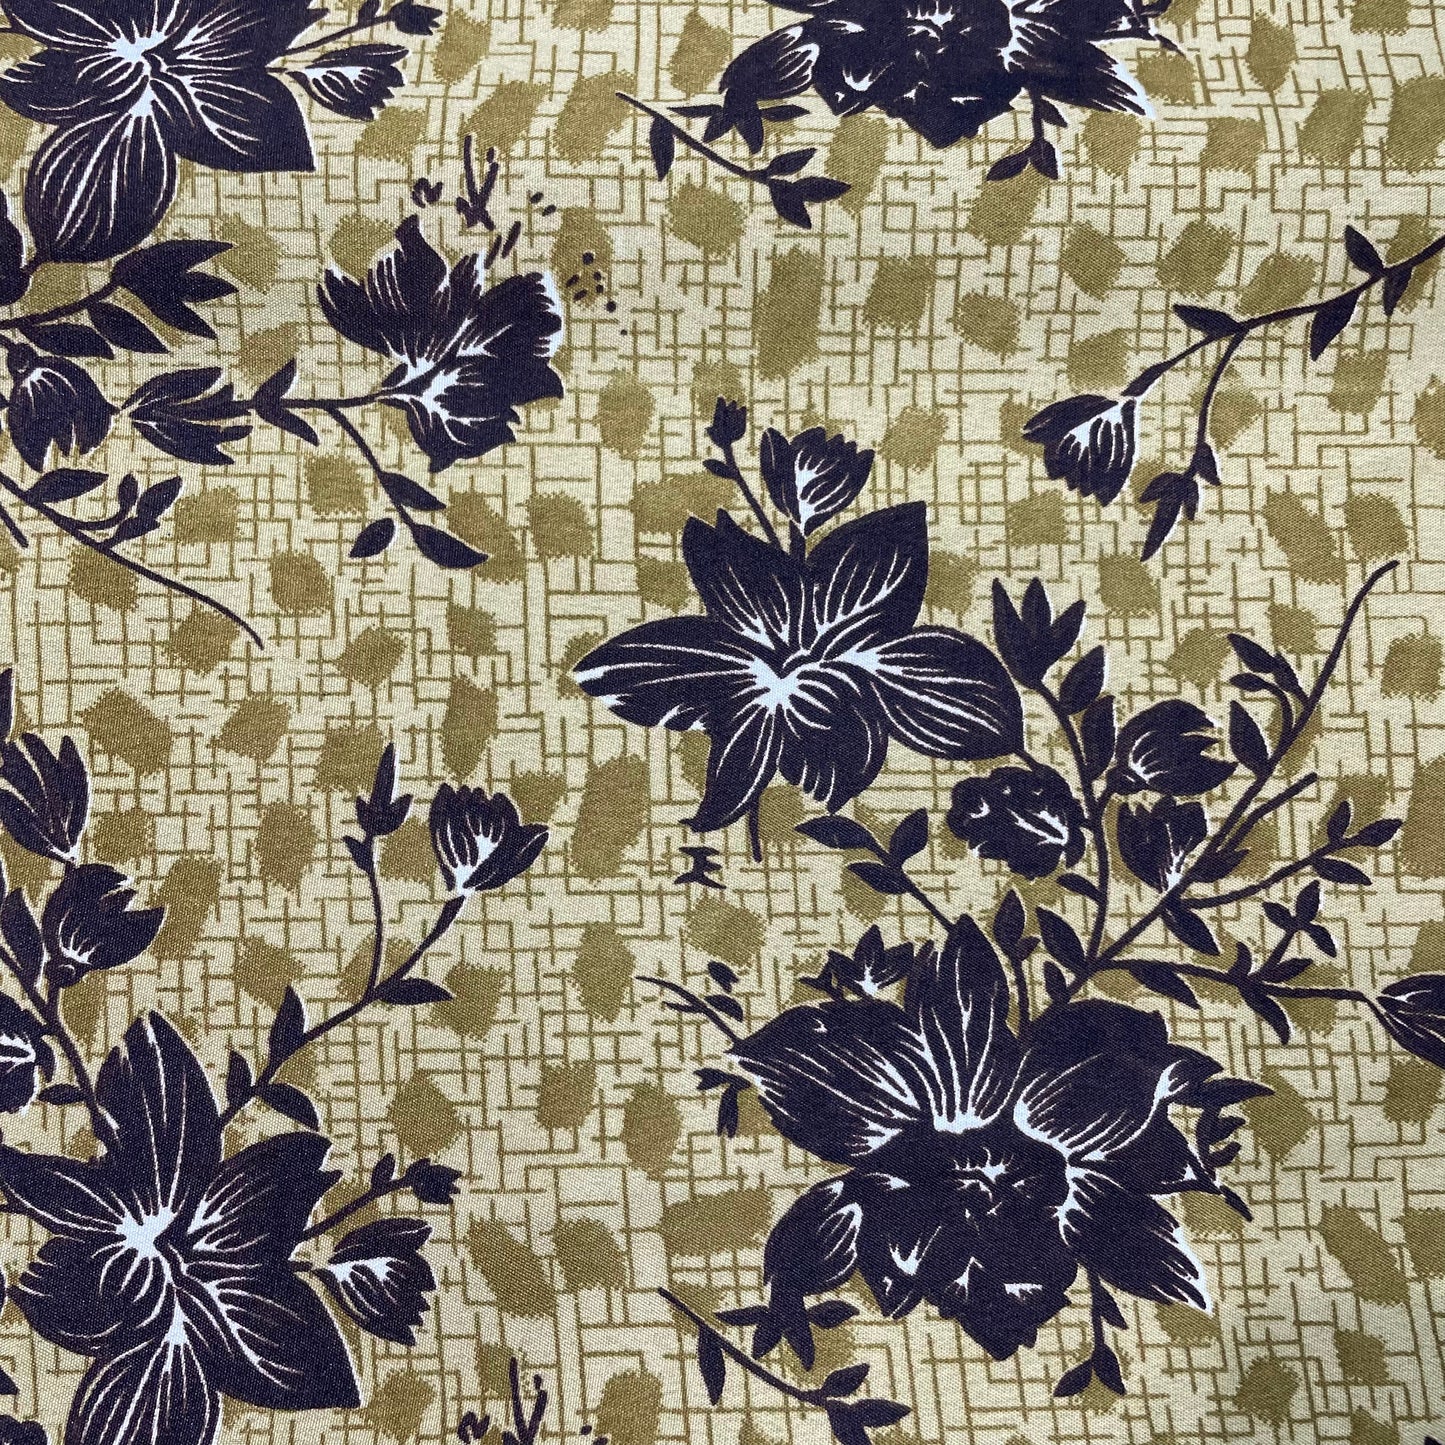 Mustard With Brown Floral Crepe Fabric - TradeUNO